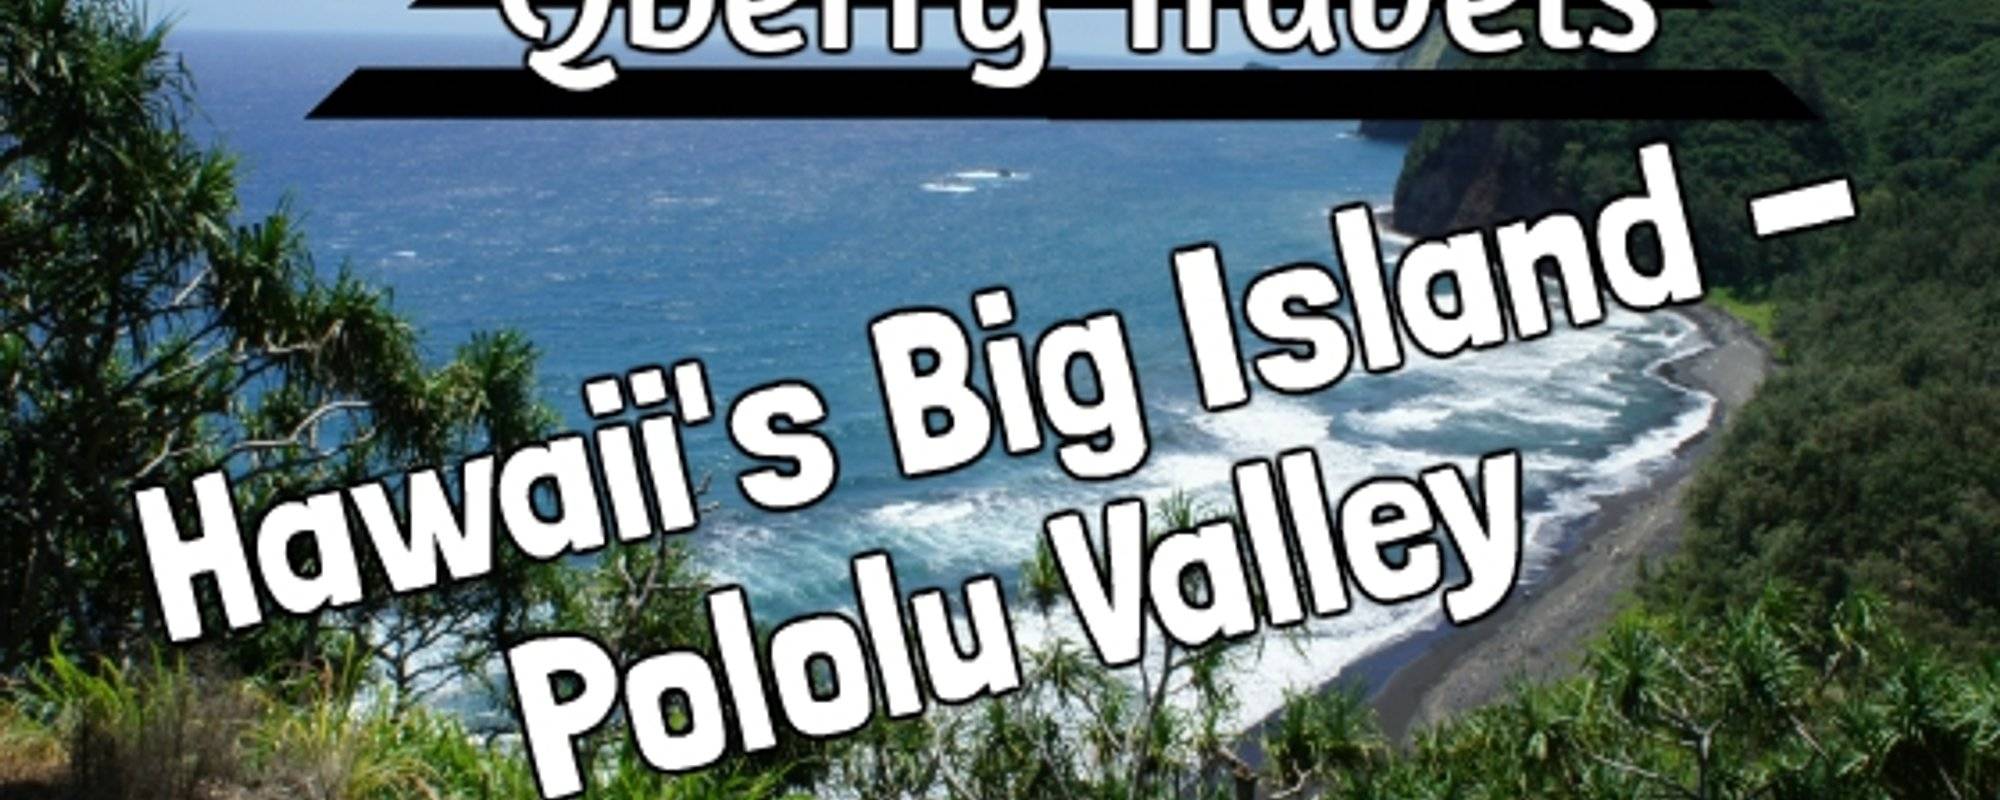 Qberry Travels: Hawaii's Big Island - Pololu Valley's Incredible views and history